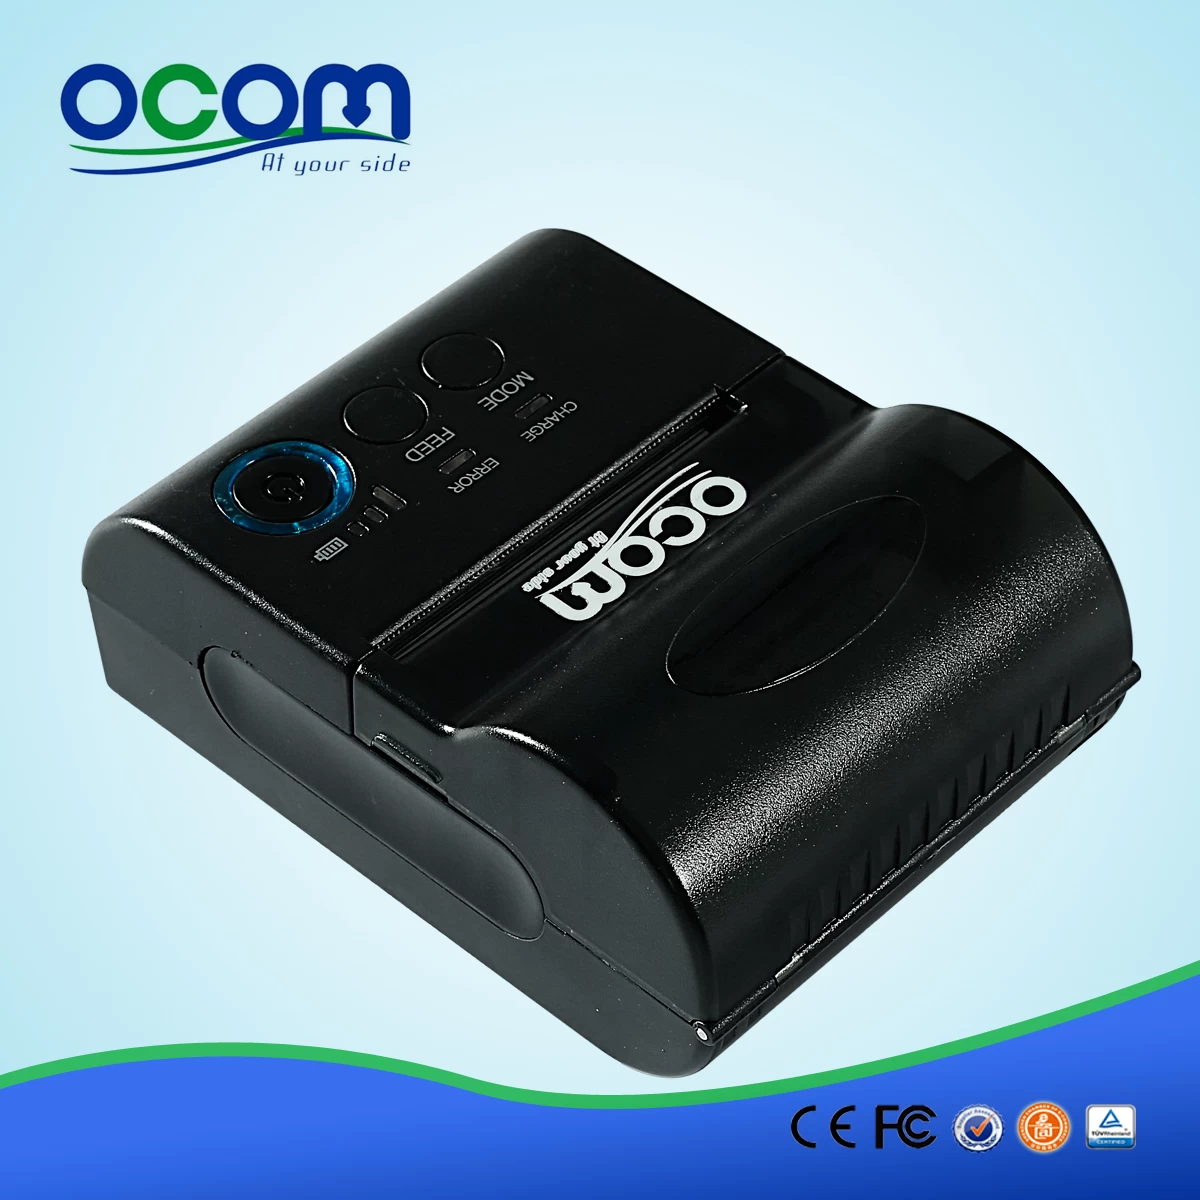 (OCPP-M03) Android IOS JAVA Windows Supported 58mm Small Bluetooth Mobile Pos Thermal Receipt Printer